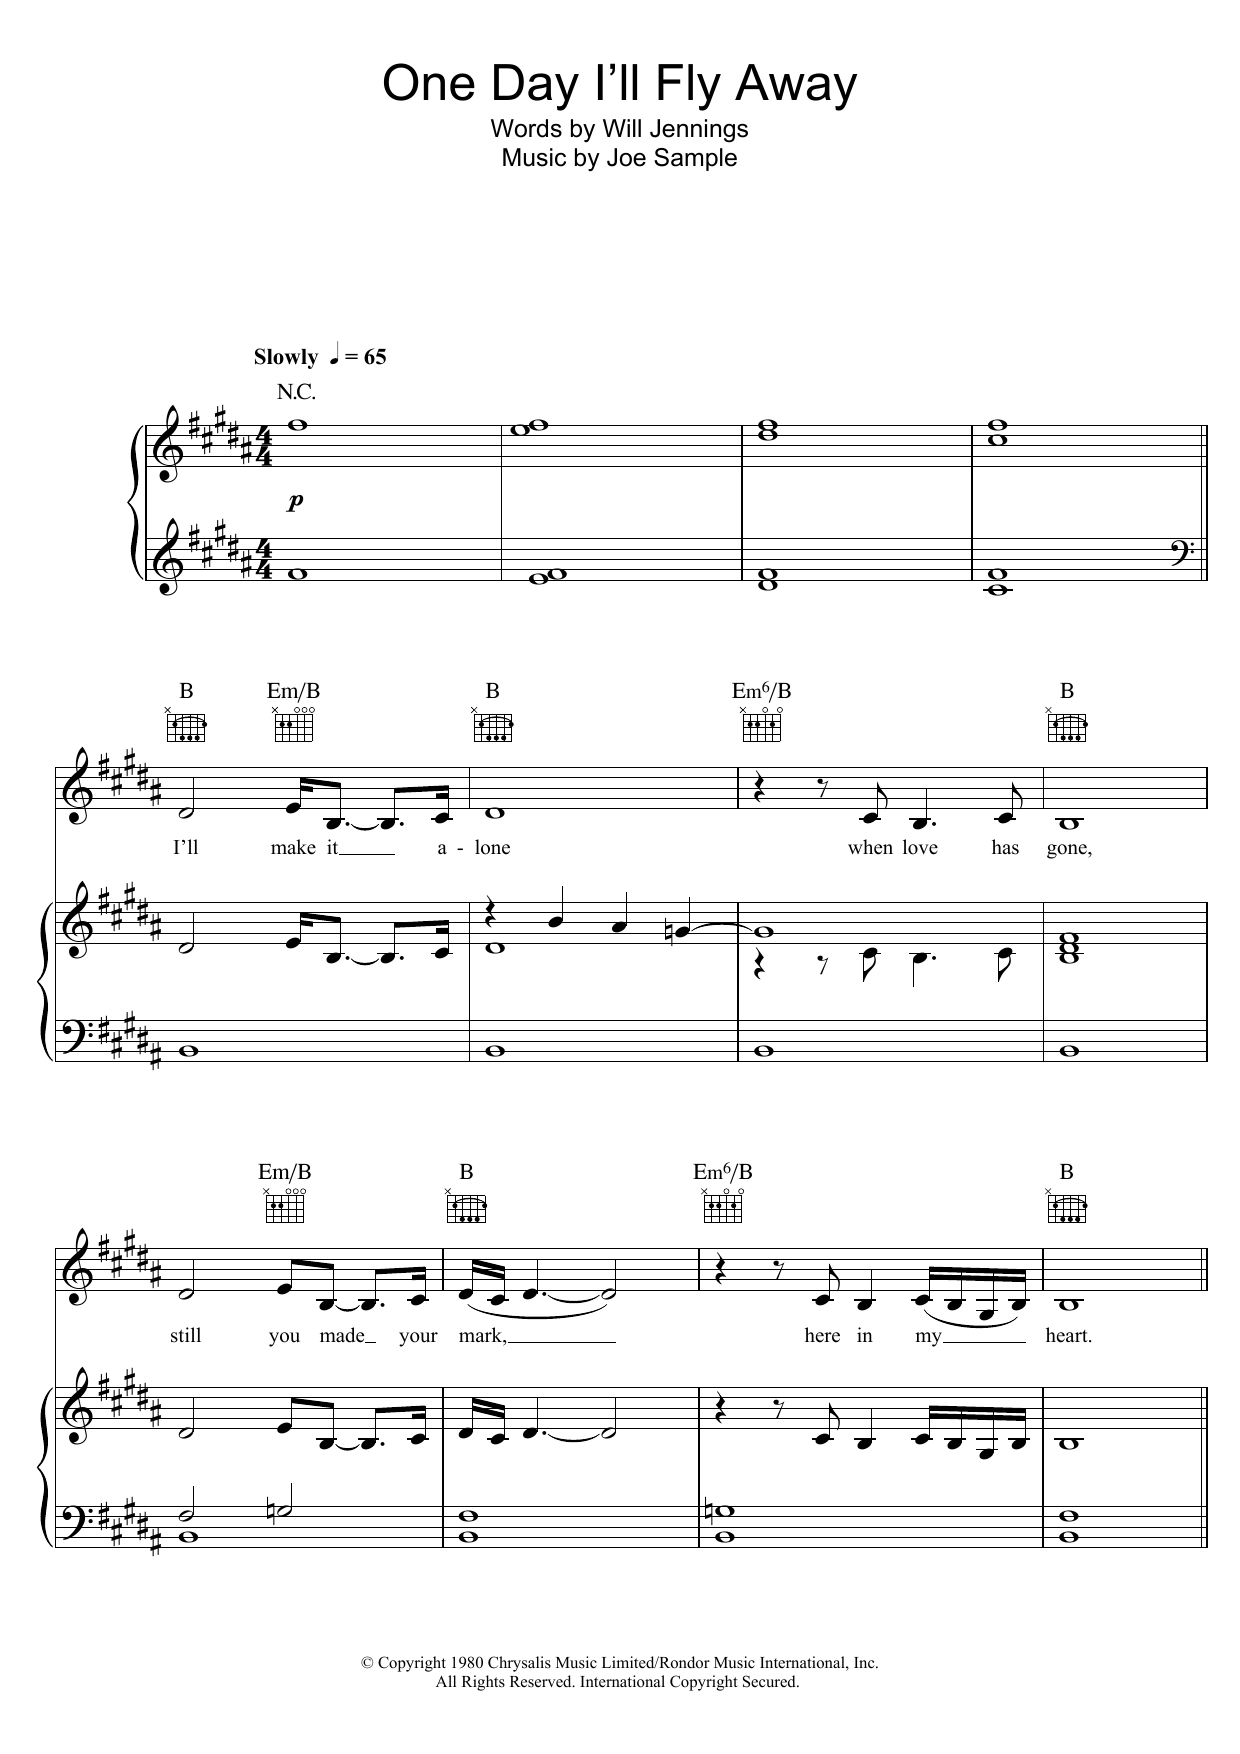 Download Vaults One Day I'll Fly Away Sheet Music